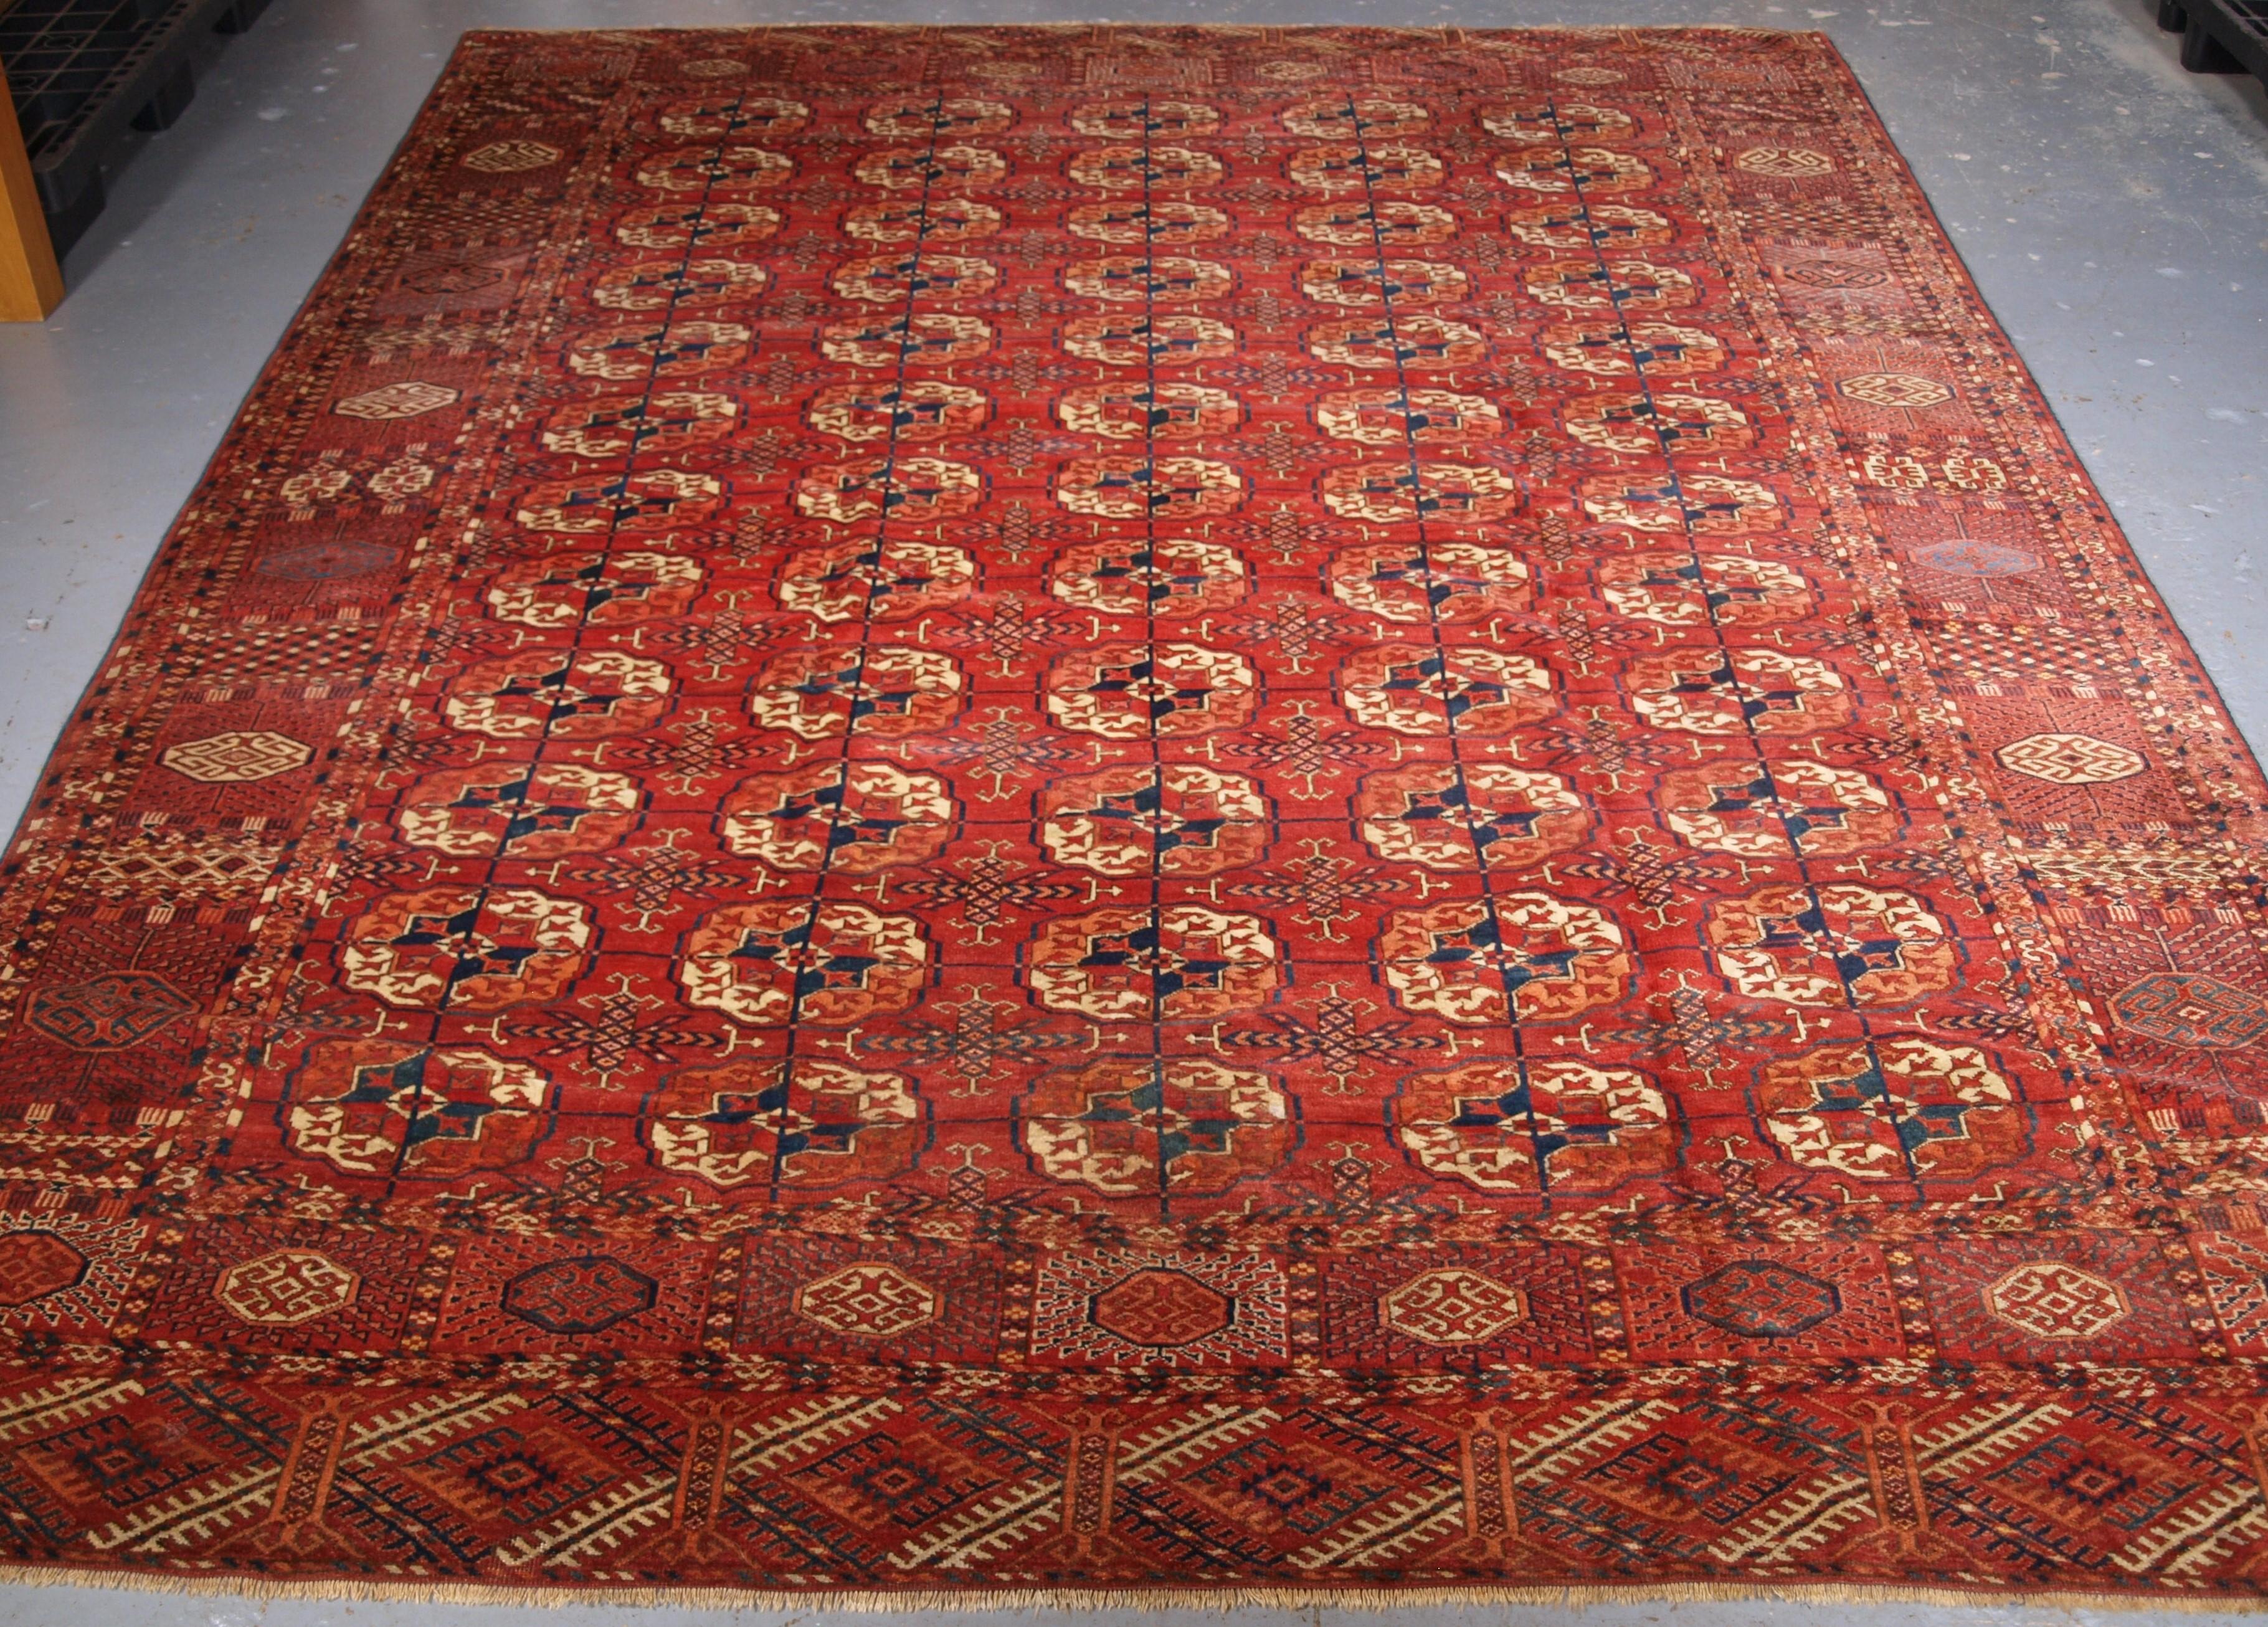 Antique Tekke Turkmen main carpet with 5 rows of 12 large round Tekke guls. A good Tekke main carpet of room size with a warm madder red field and large well drawn large Tekke guls. The minor guls are of an early form with the complete 'bow and